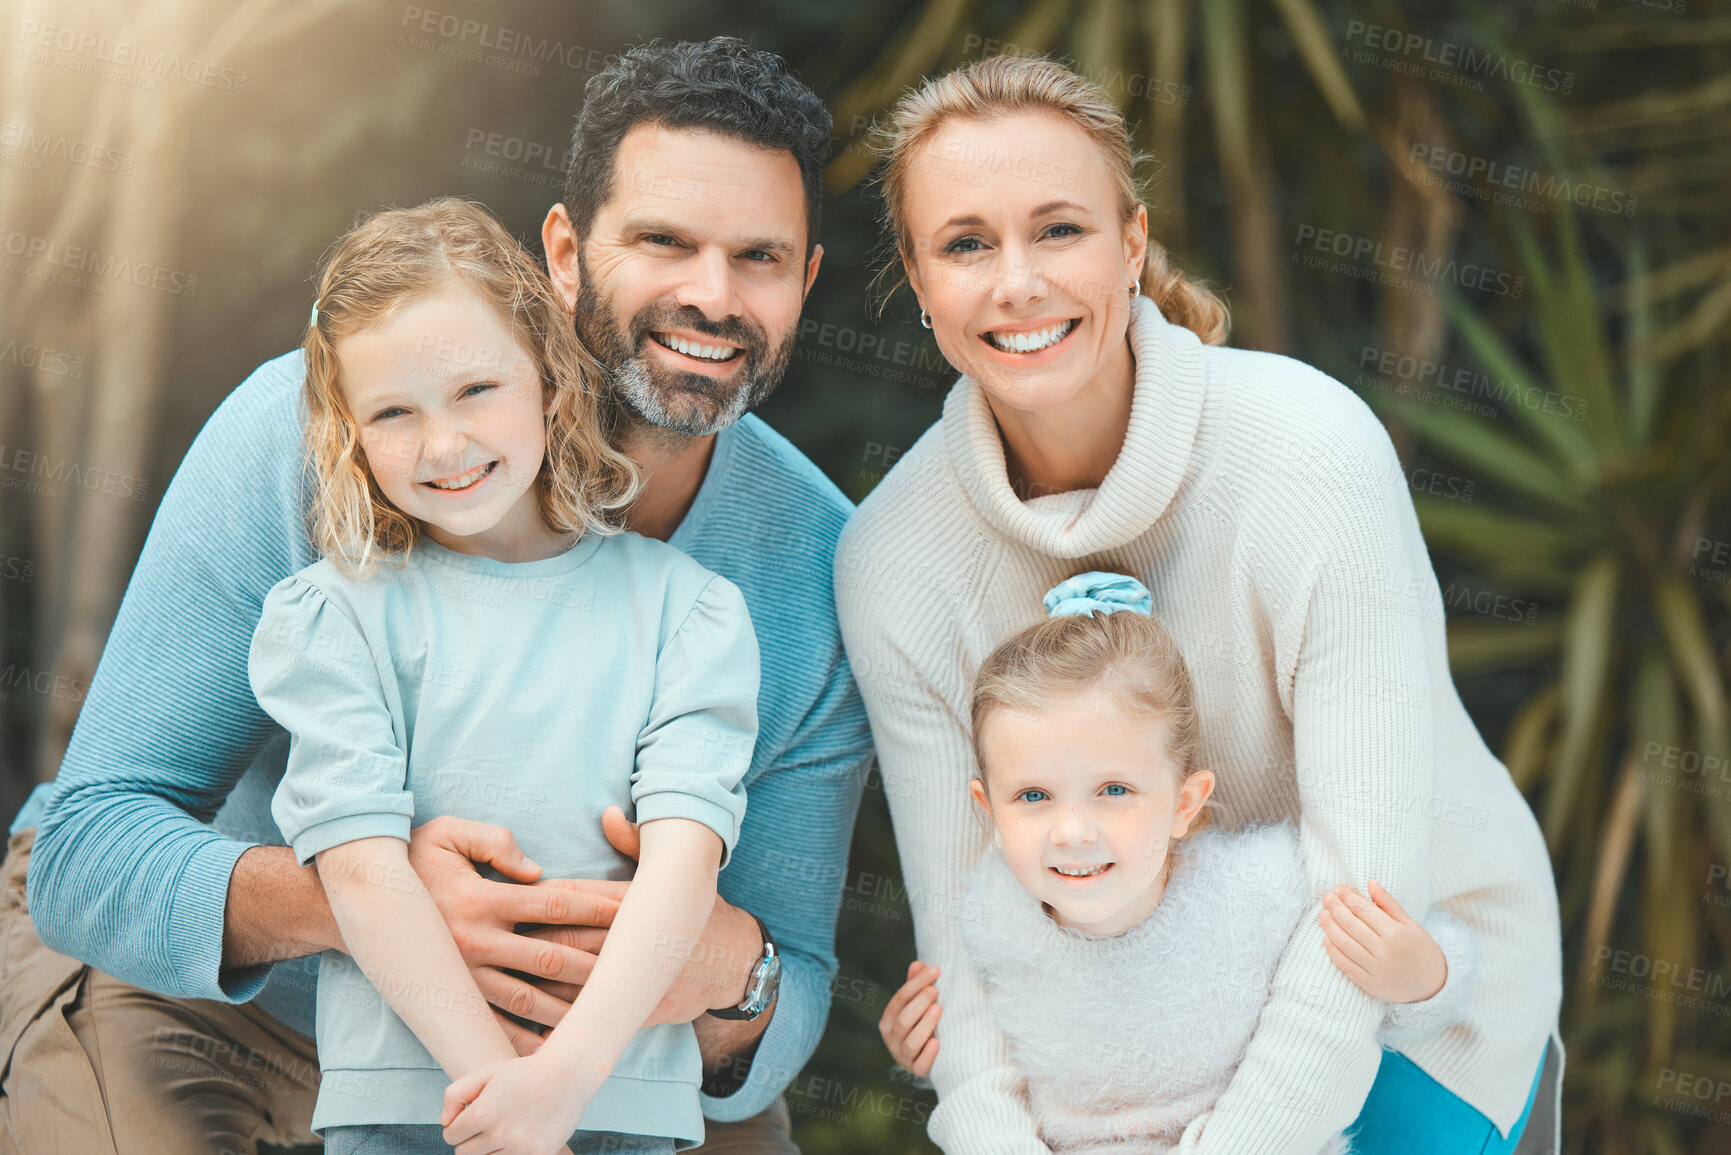 Buy stock photo Shot of a family standing together in a yard